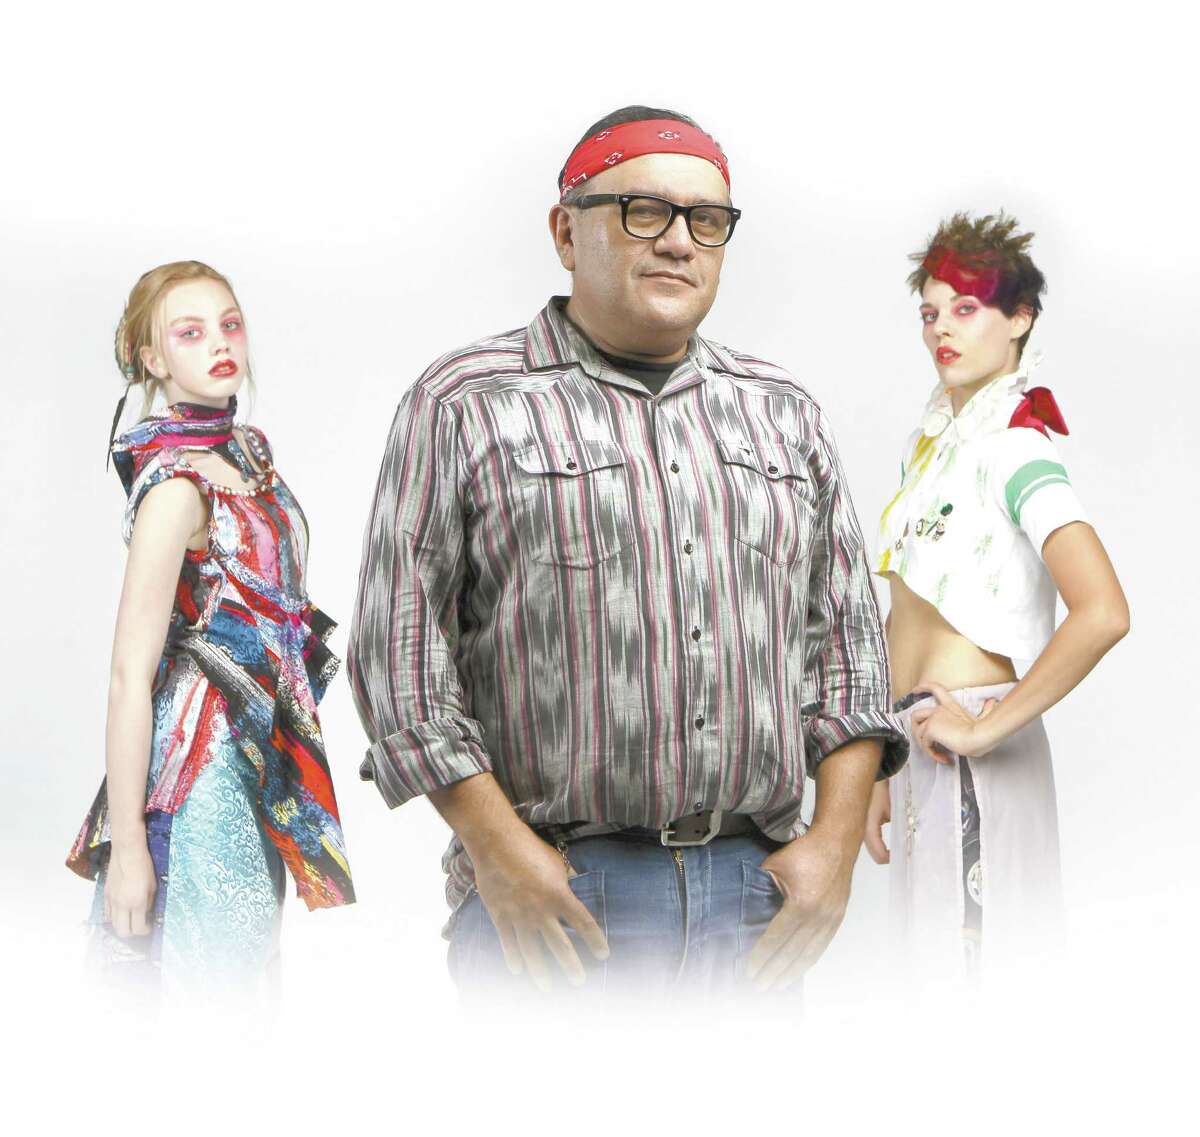 Designer Agosto Cuellar uses “upcycled” vintage looks to create his San Antoyko collection, which will be shown Saturday at the “Runway en la Calle” fashion show.